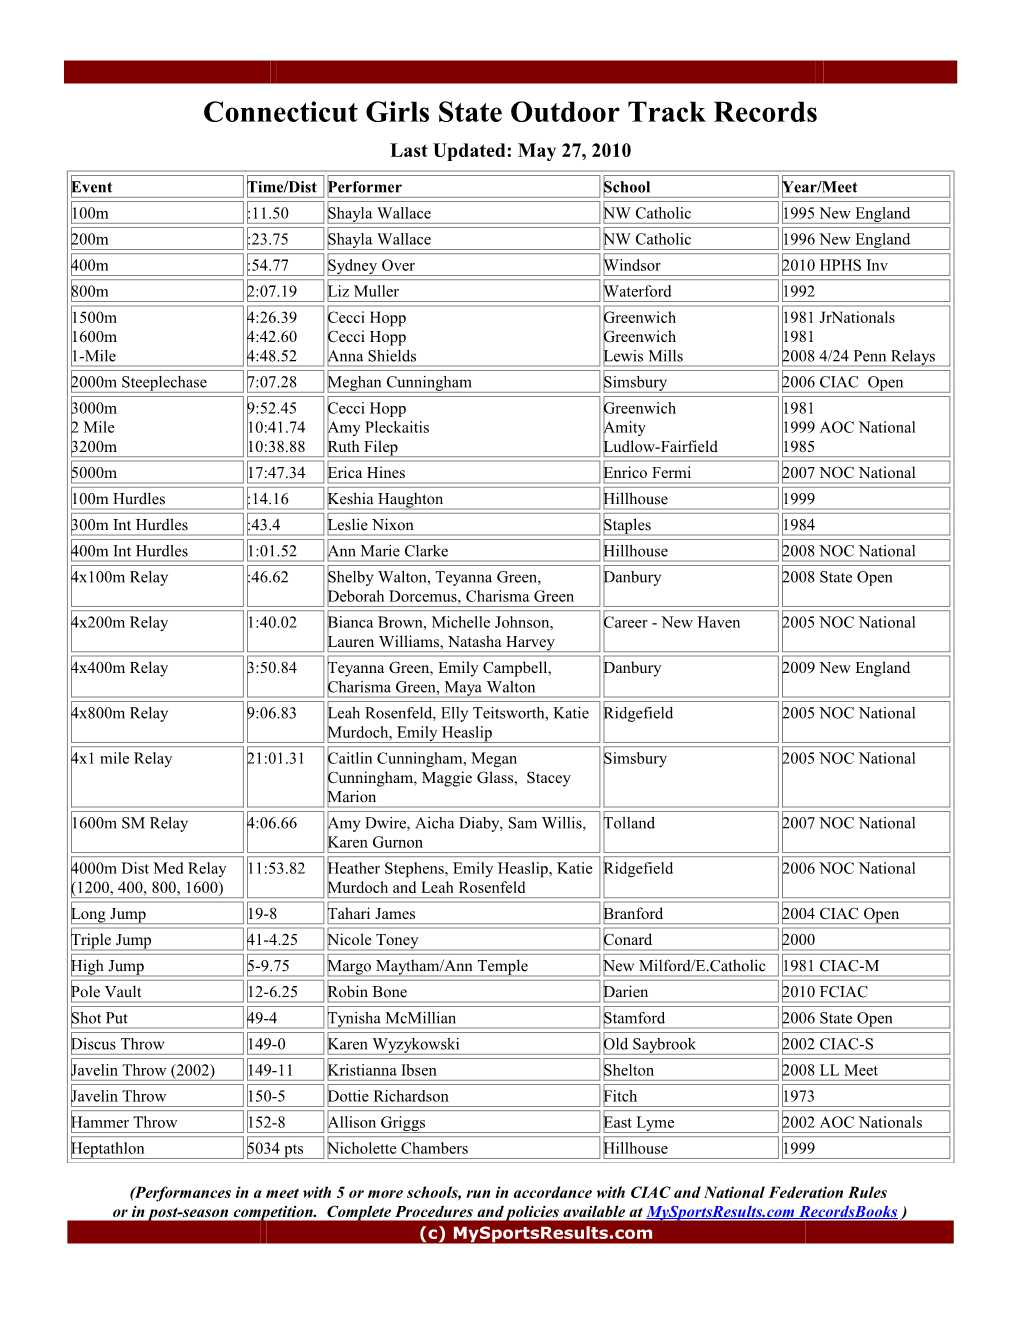 CT Girls State Outdoor Track Records